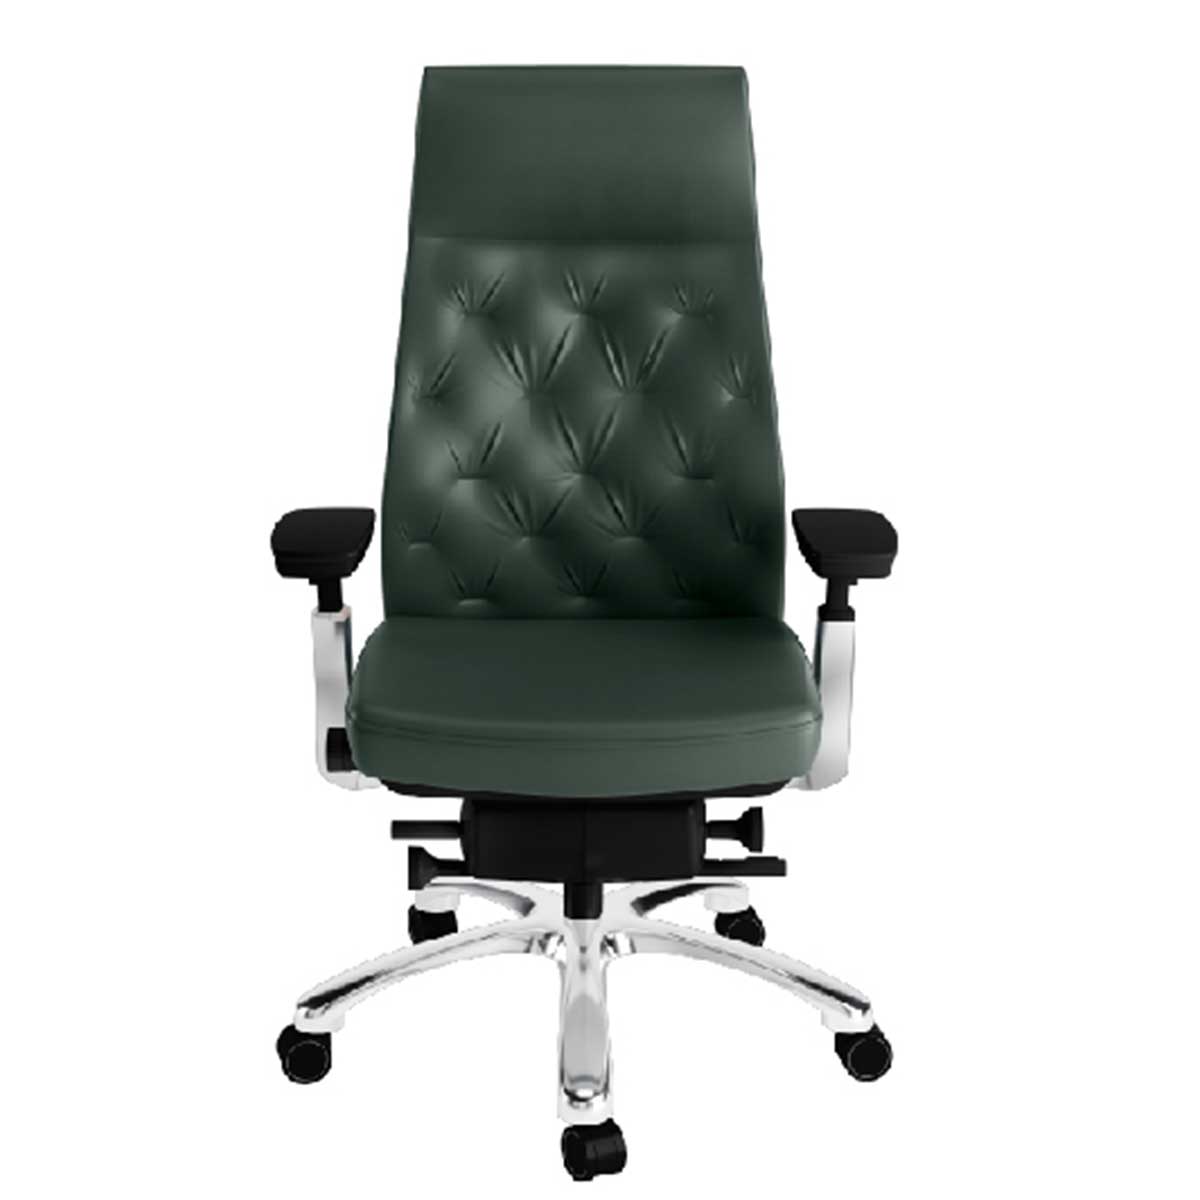 Director & Chairman-Chair Manufacturers, Suppliers in Noida Sector 47